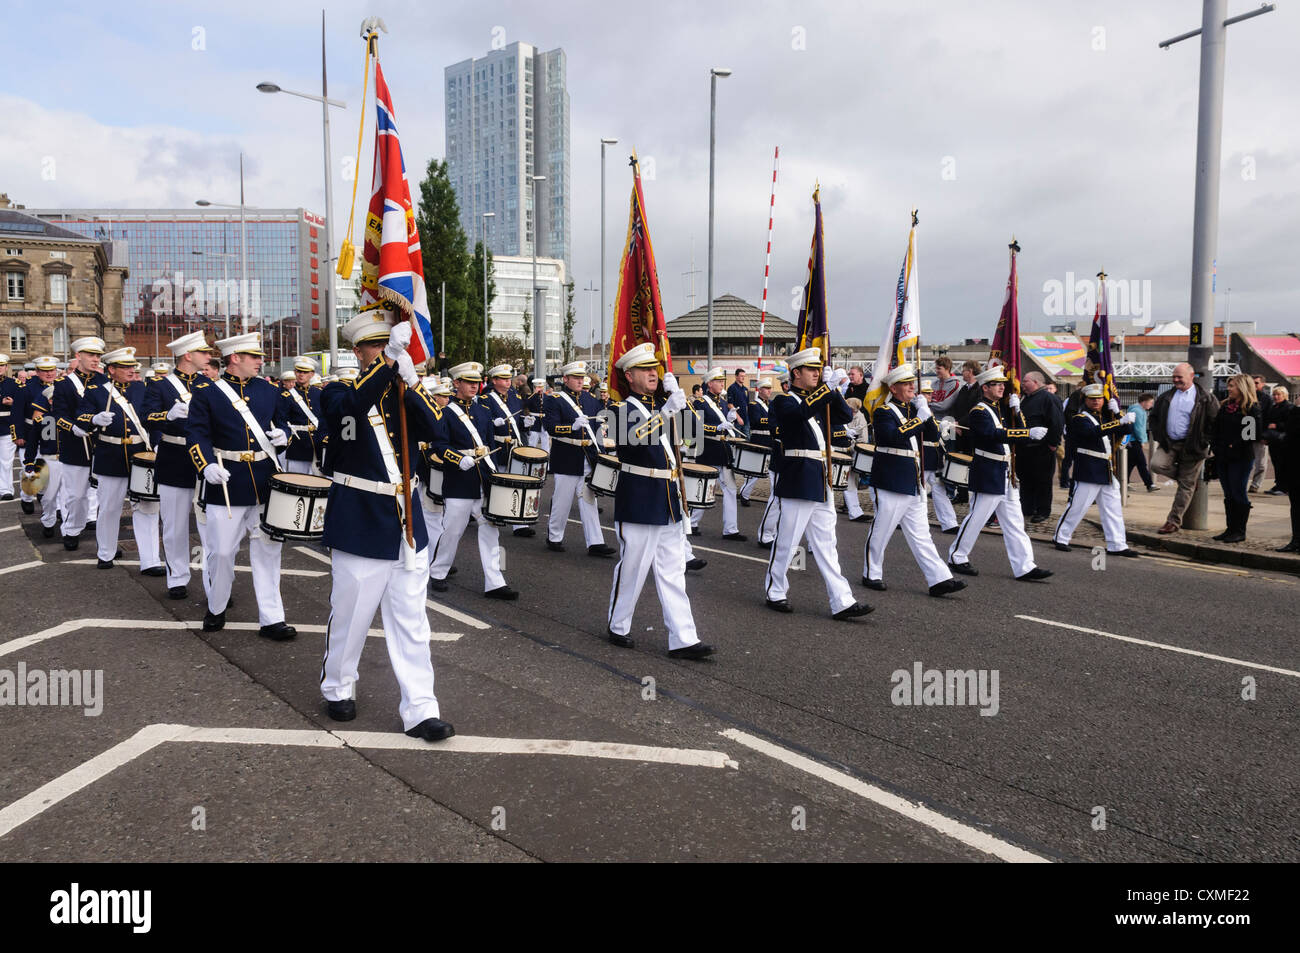 Flute band marches on a road in Belfast during an Orange Order parade Stock Photo